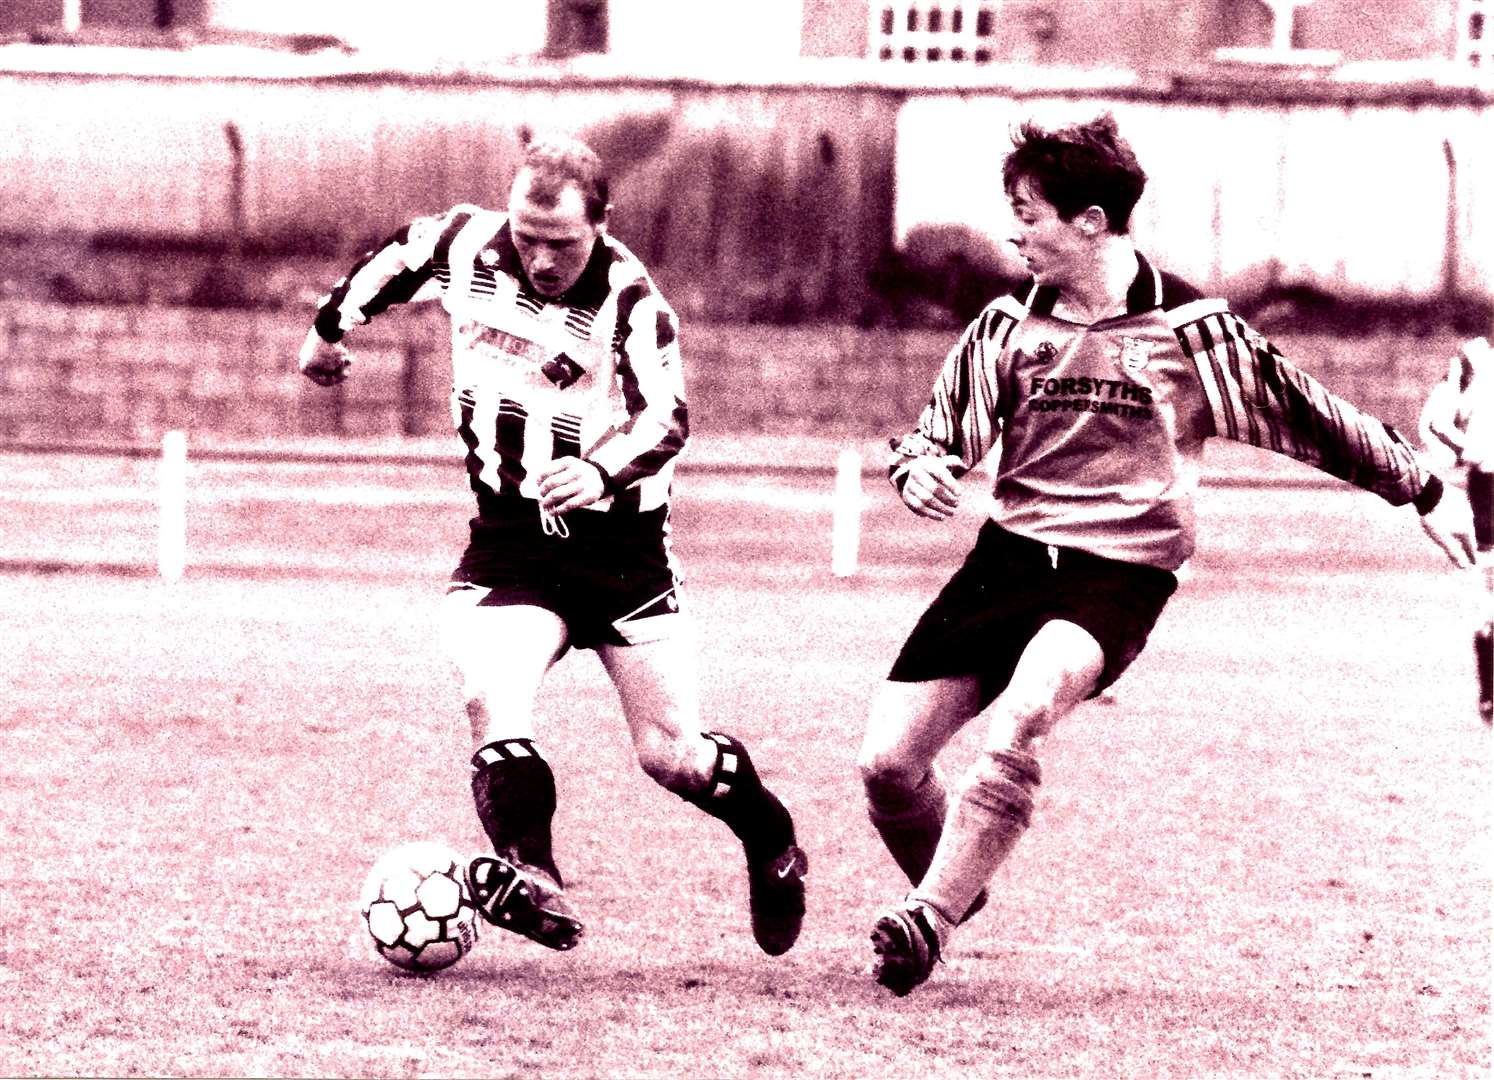 Stewart Sutherland bosses the midfield for Wick Academy during their inaugural season in the Highland League in 1994/95.